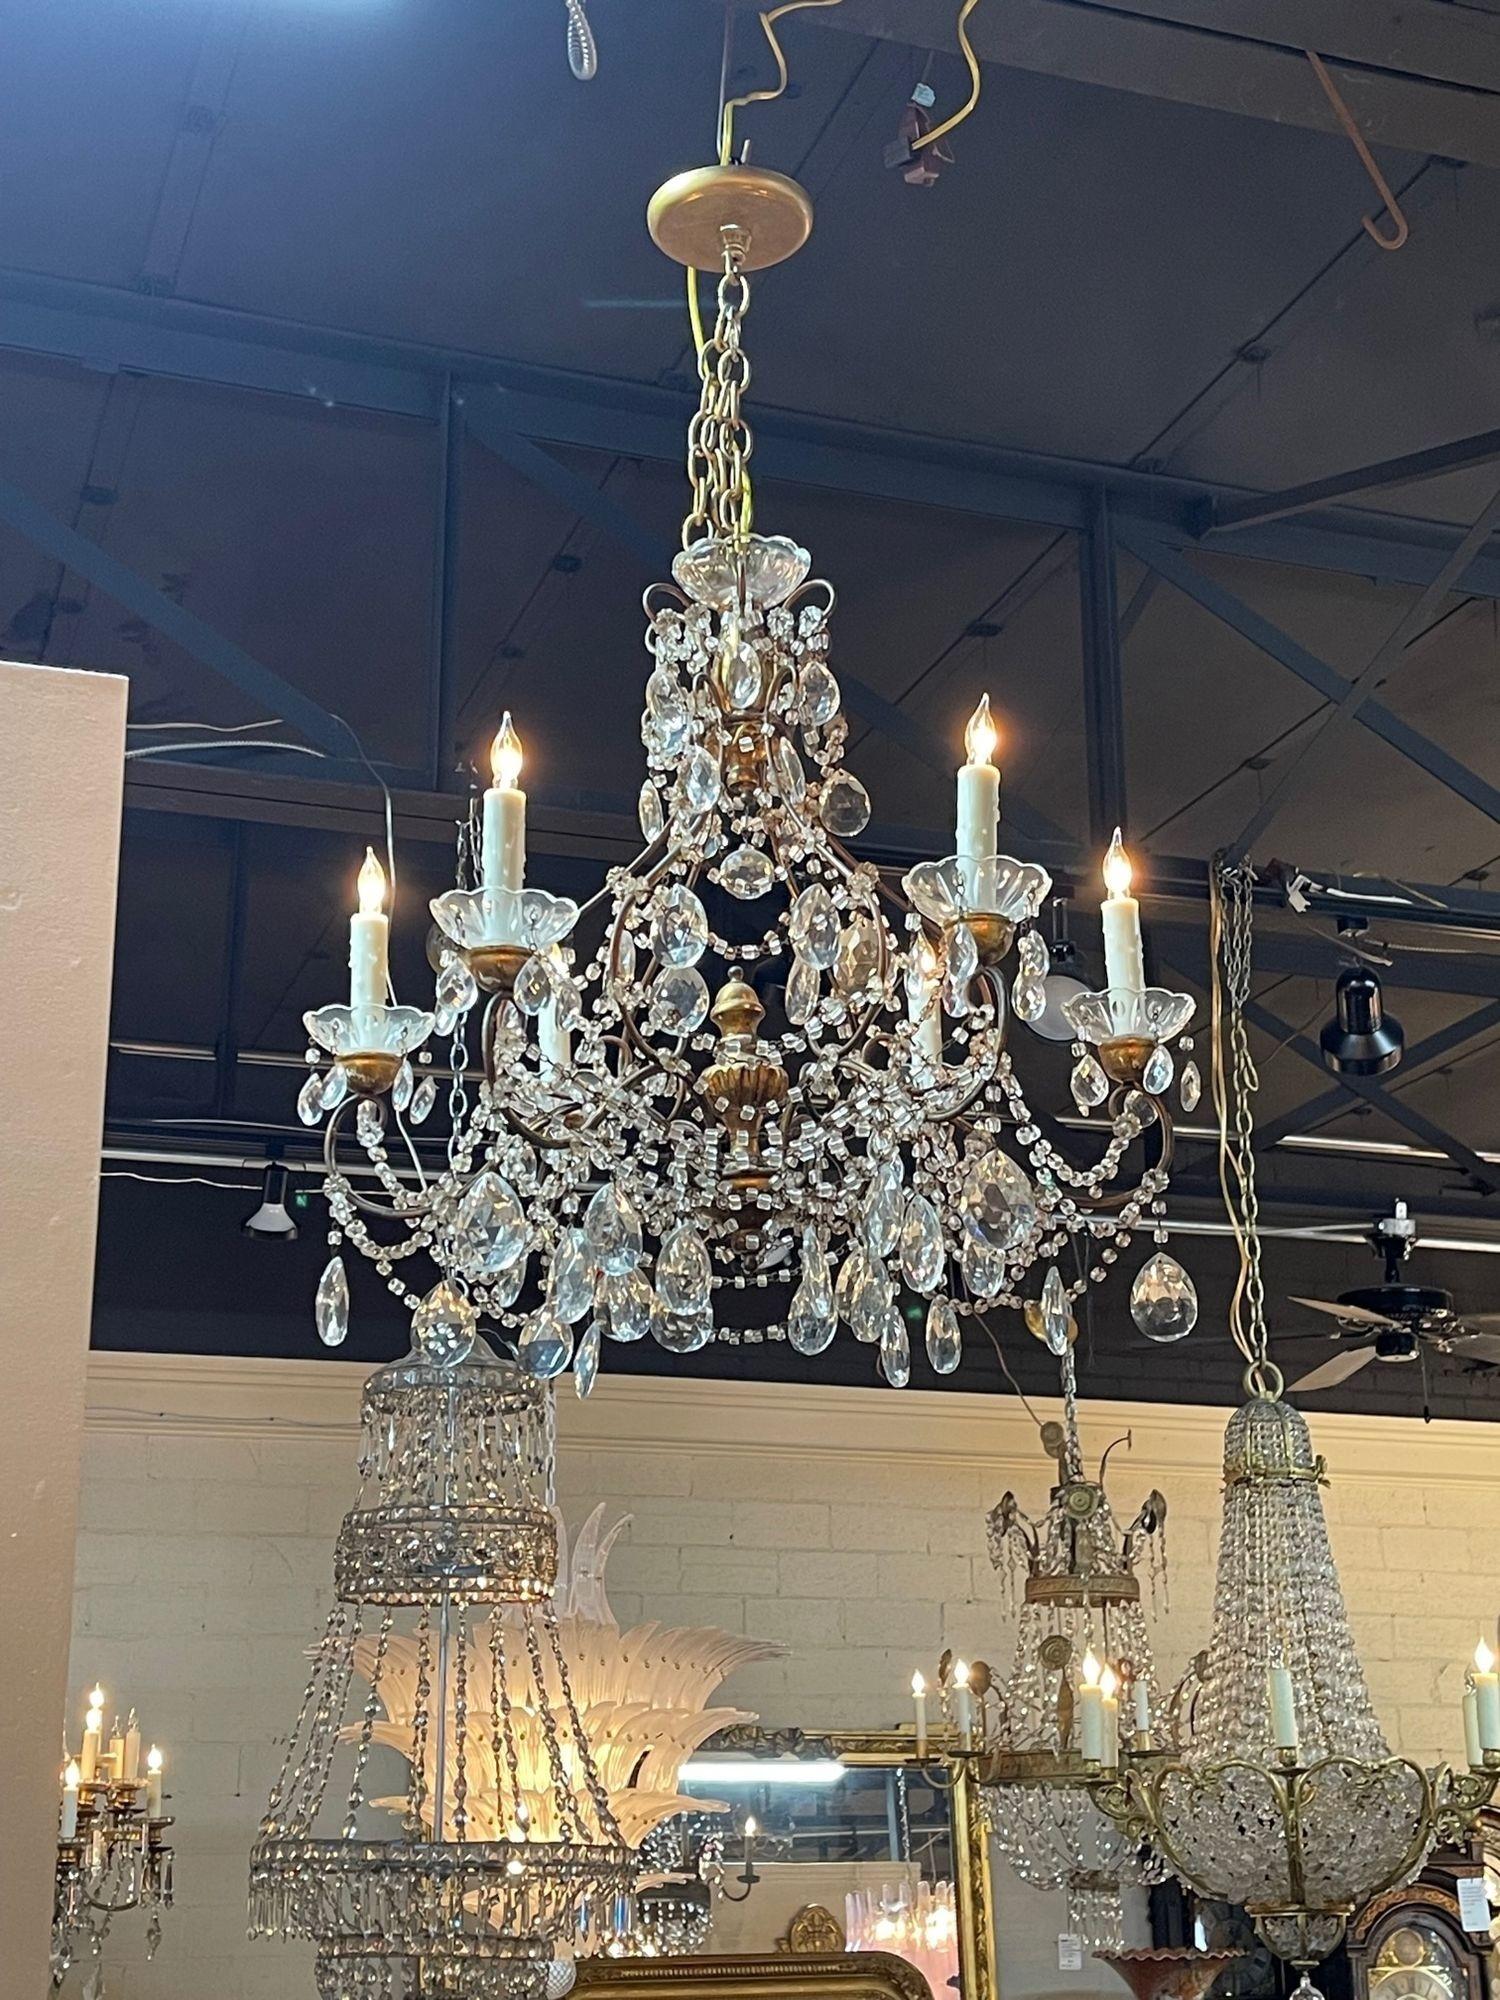 Elegant vintage Italian beaded crystal and giltwood chandelier with 6 lights. Featuring beautiful draping crystals and beads. Very fine quality! Lovely!!